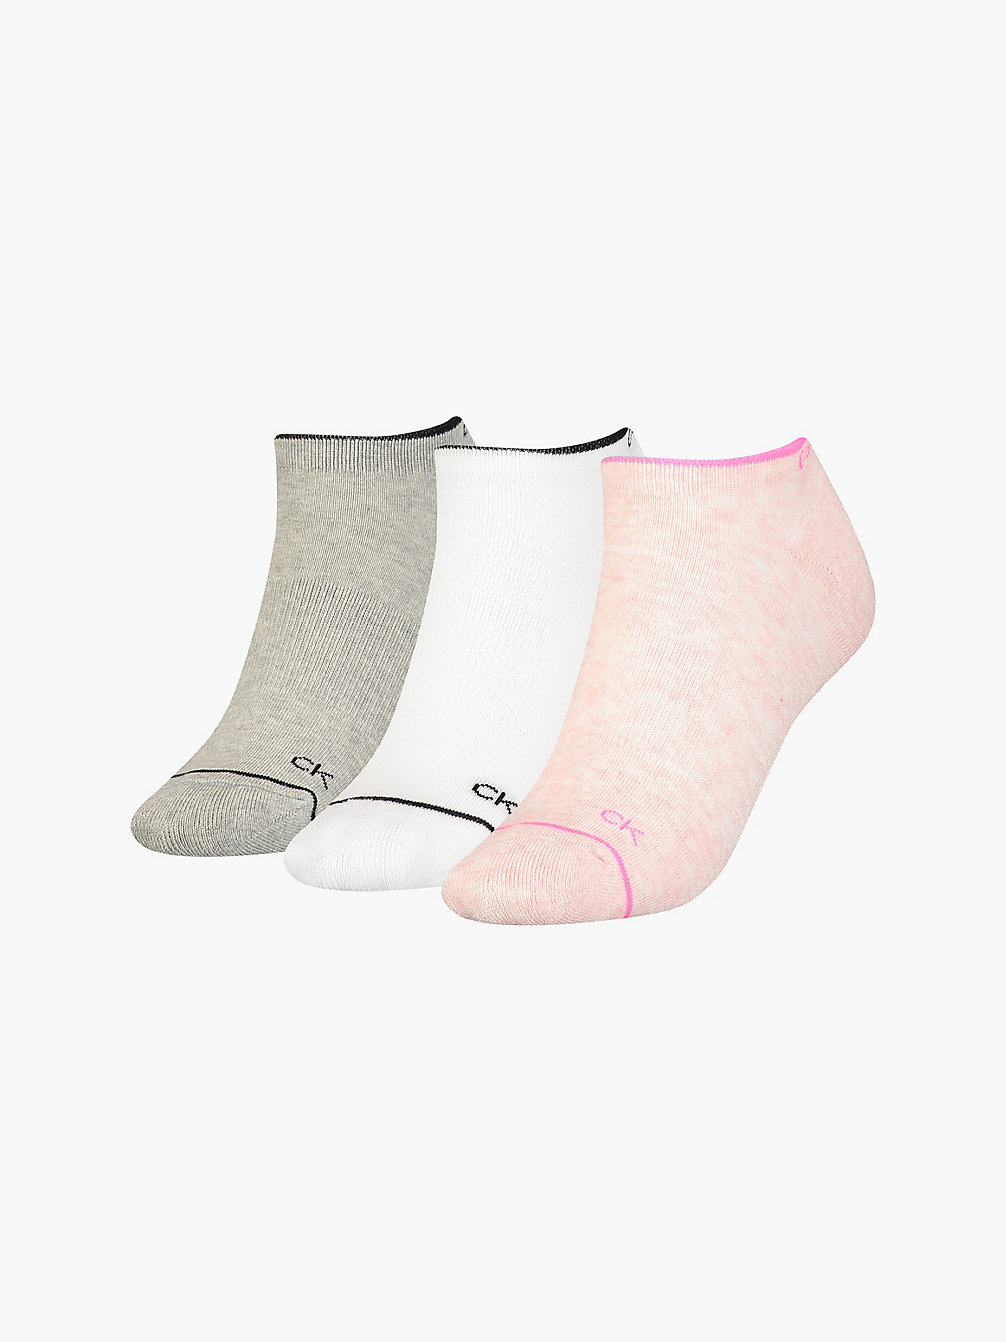 PINK COMBO 3 Pack Ankle Socks undefined women Calvin Klein